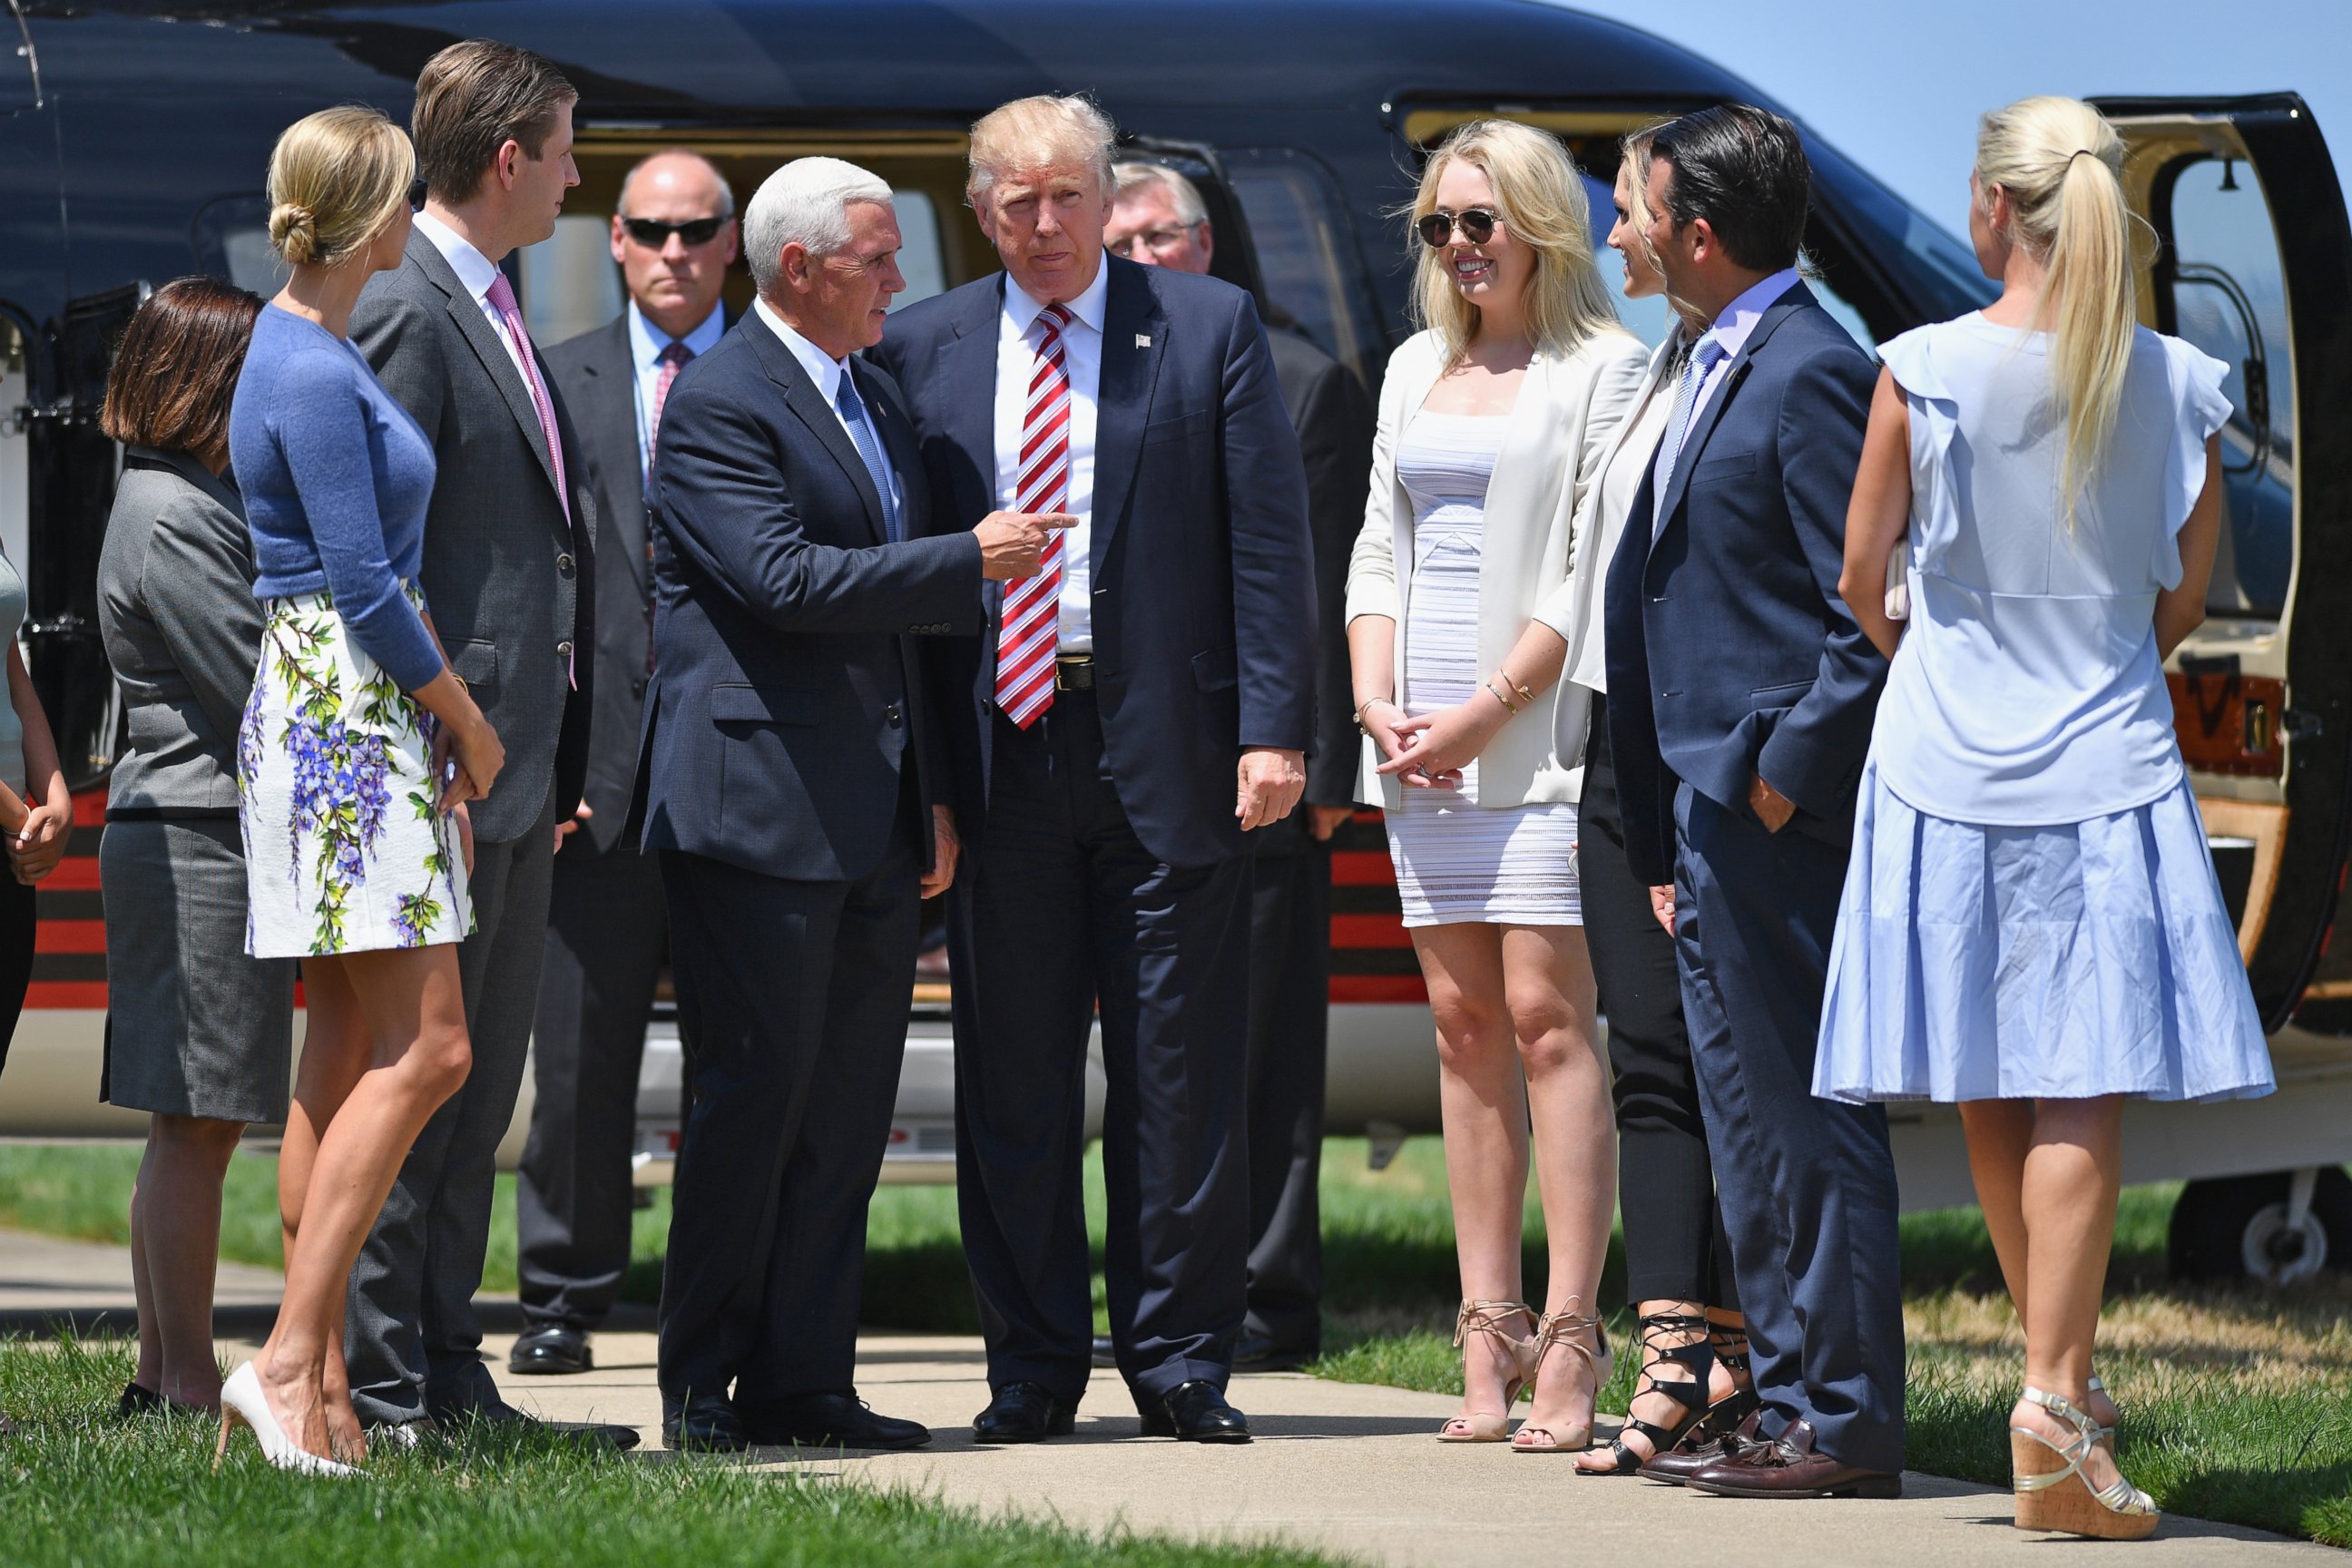 PHOTO: Donald Trump and his family attend a welcome arrival event with Governor Mike Pence and his family at the Great Lakes Science Centre, July 20, 2016, in Cleveland Ohio. 